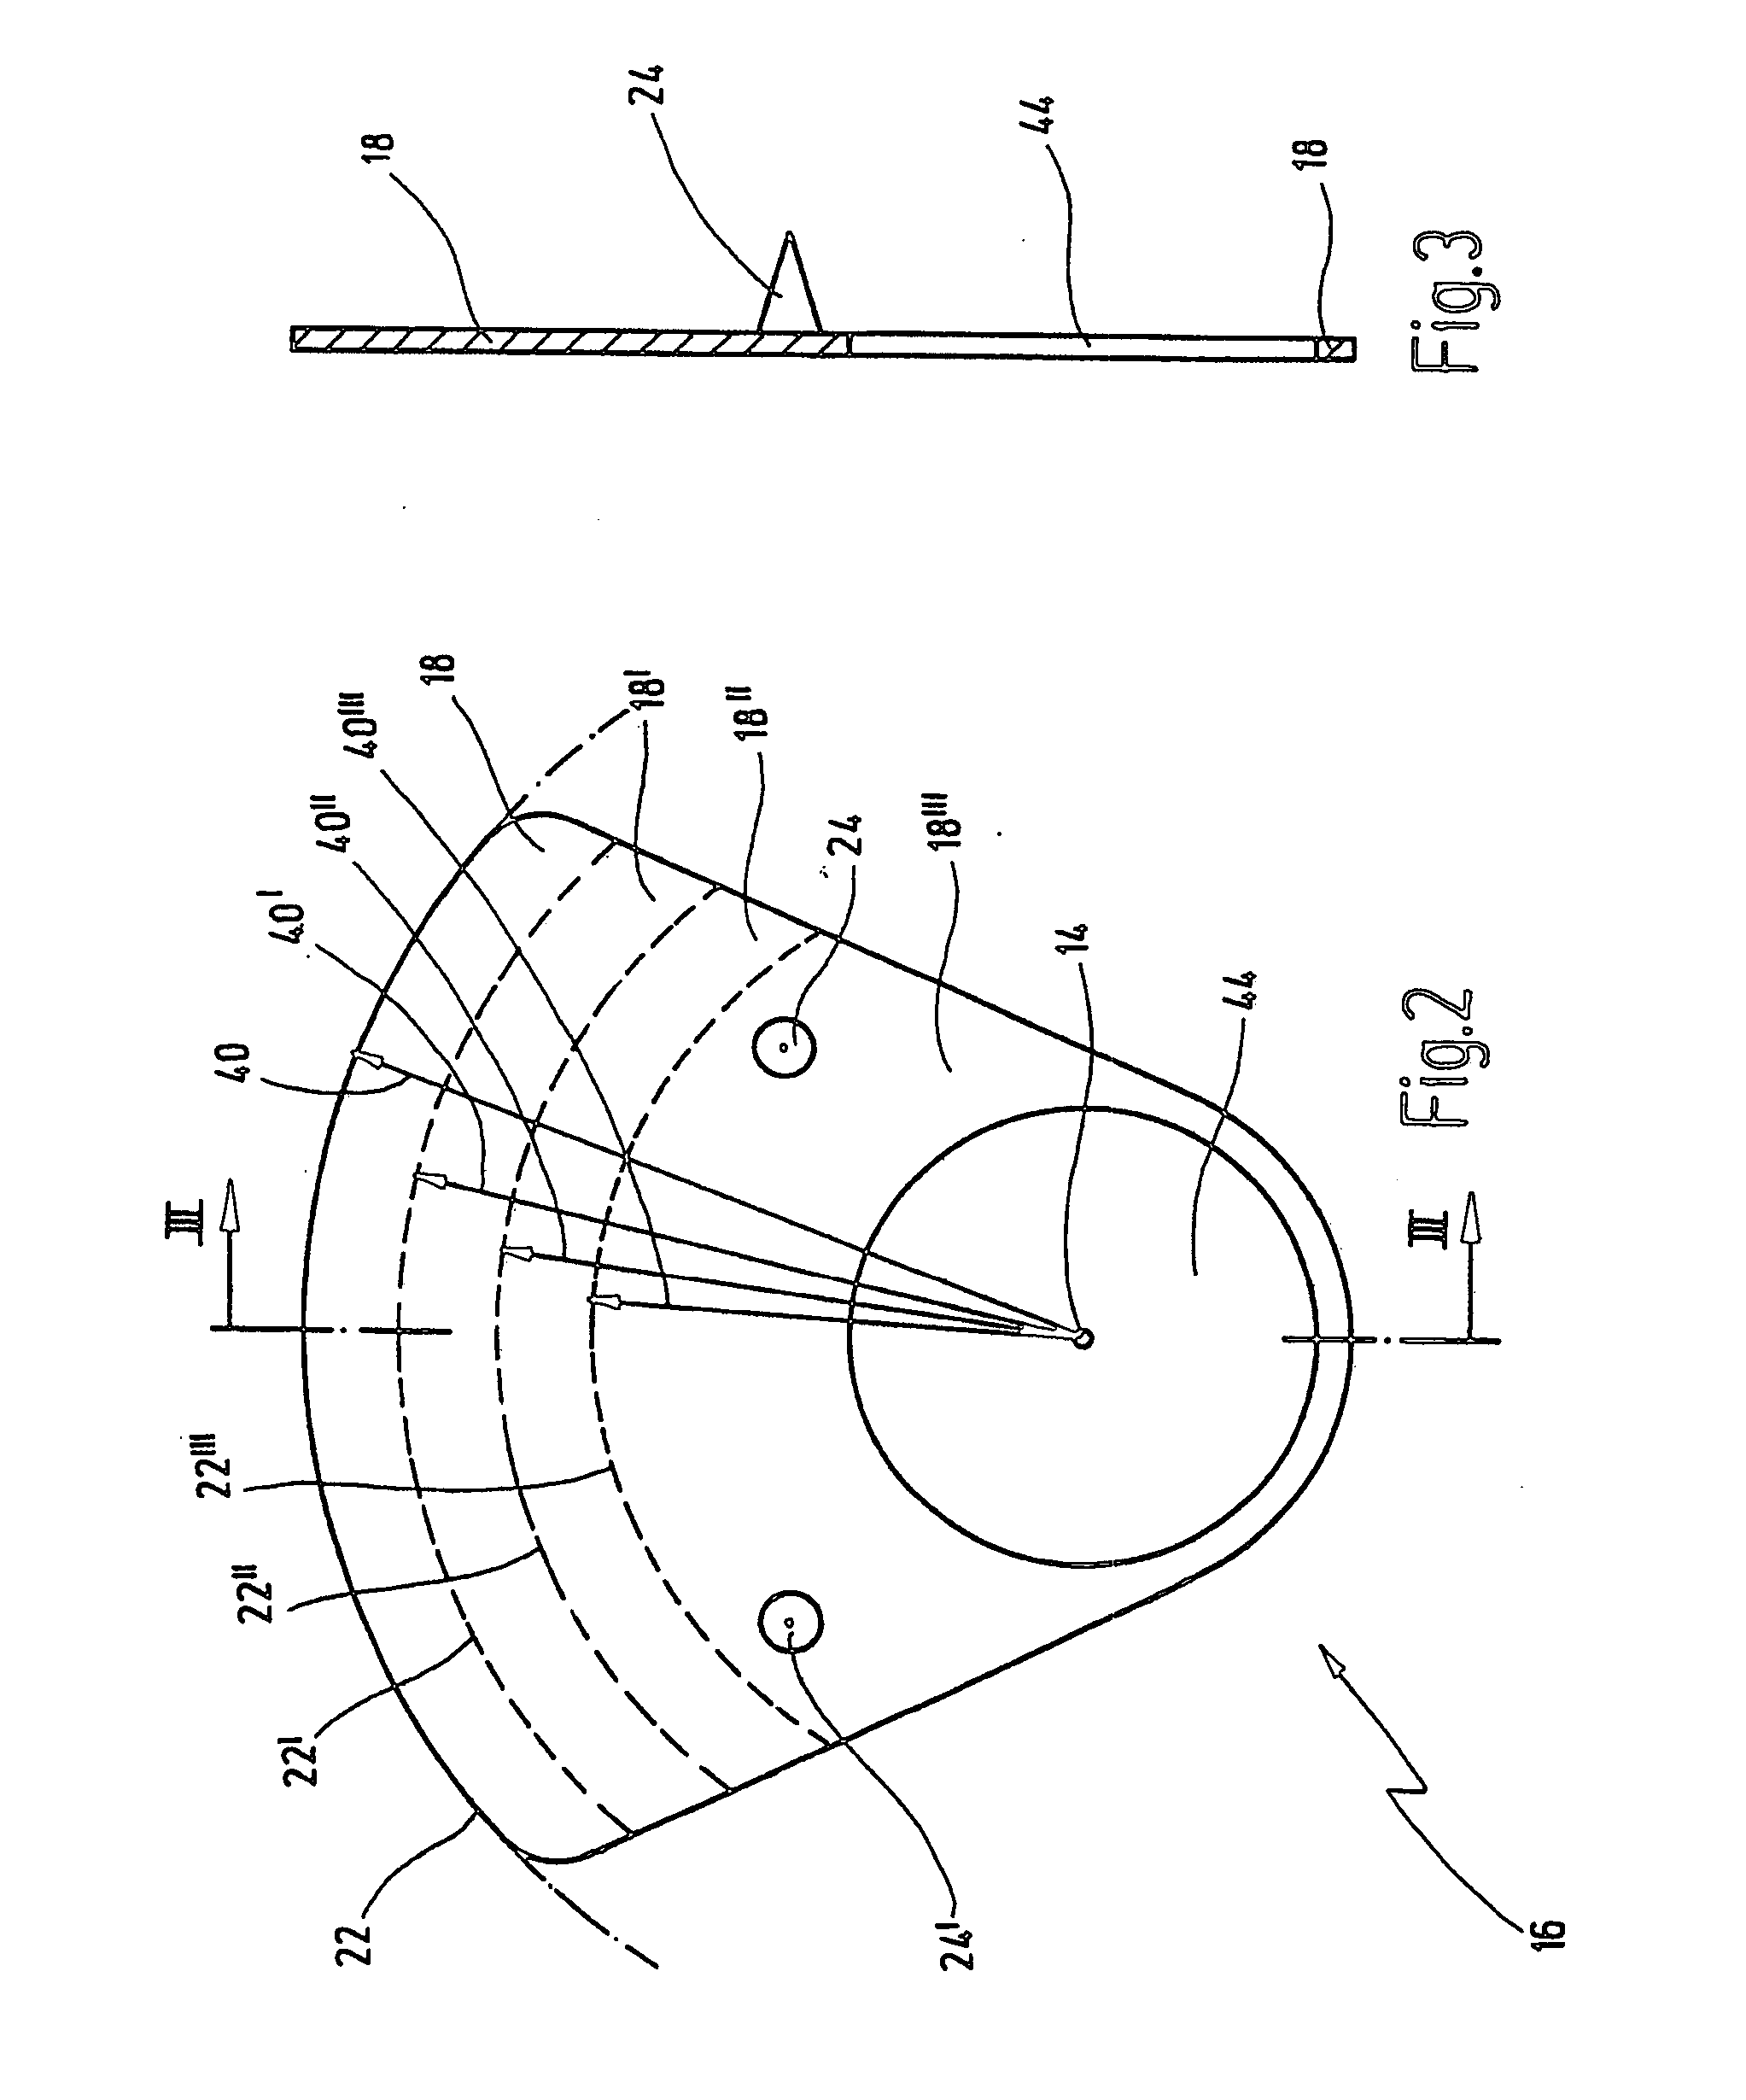 Device for forming a drill hole in bone